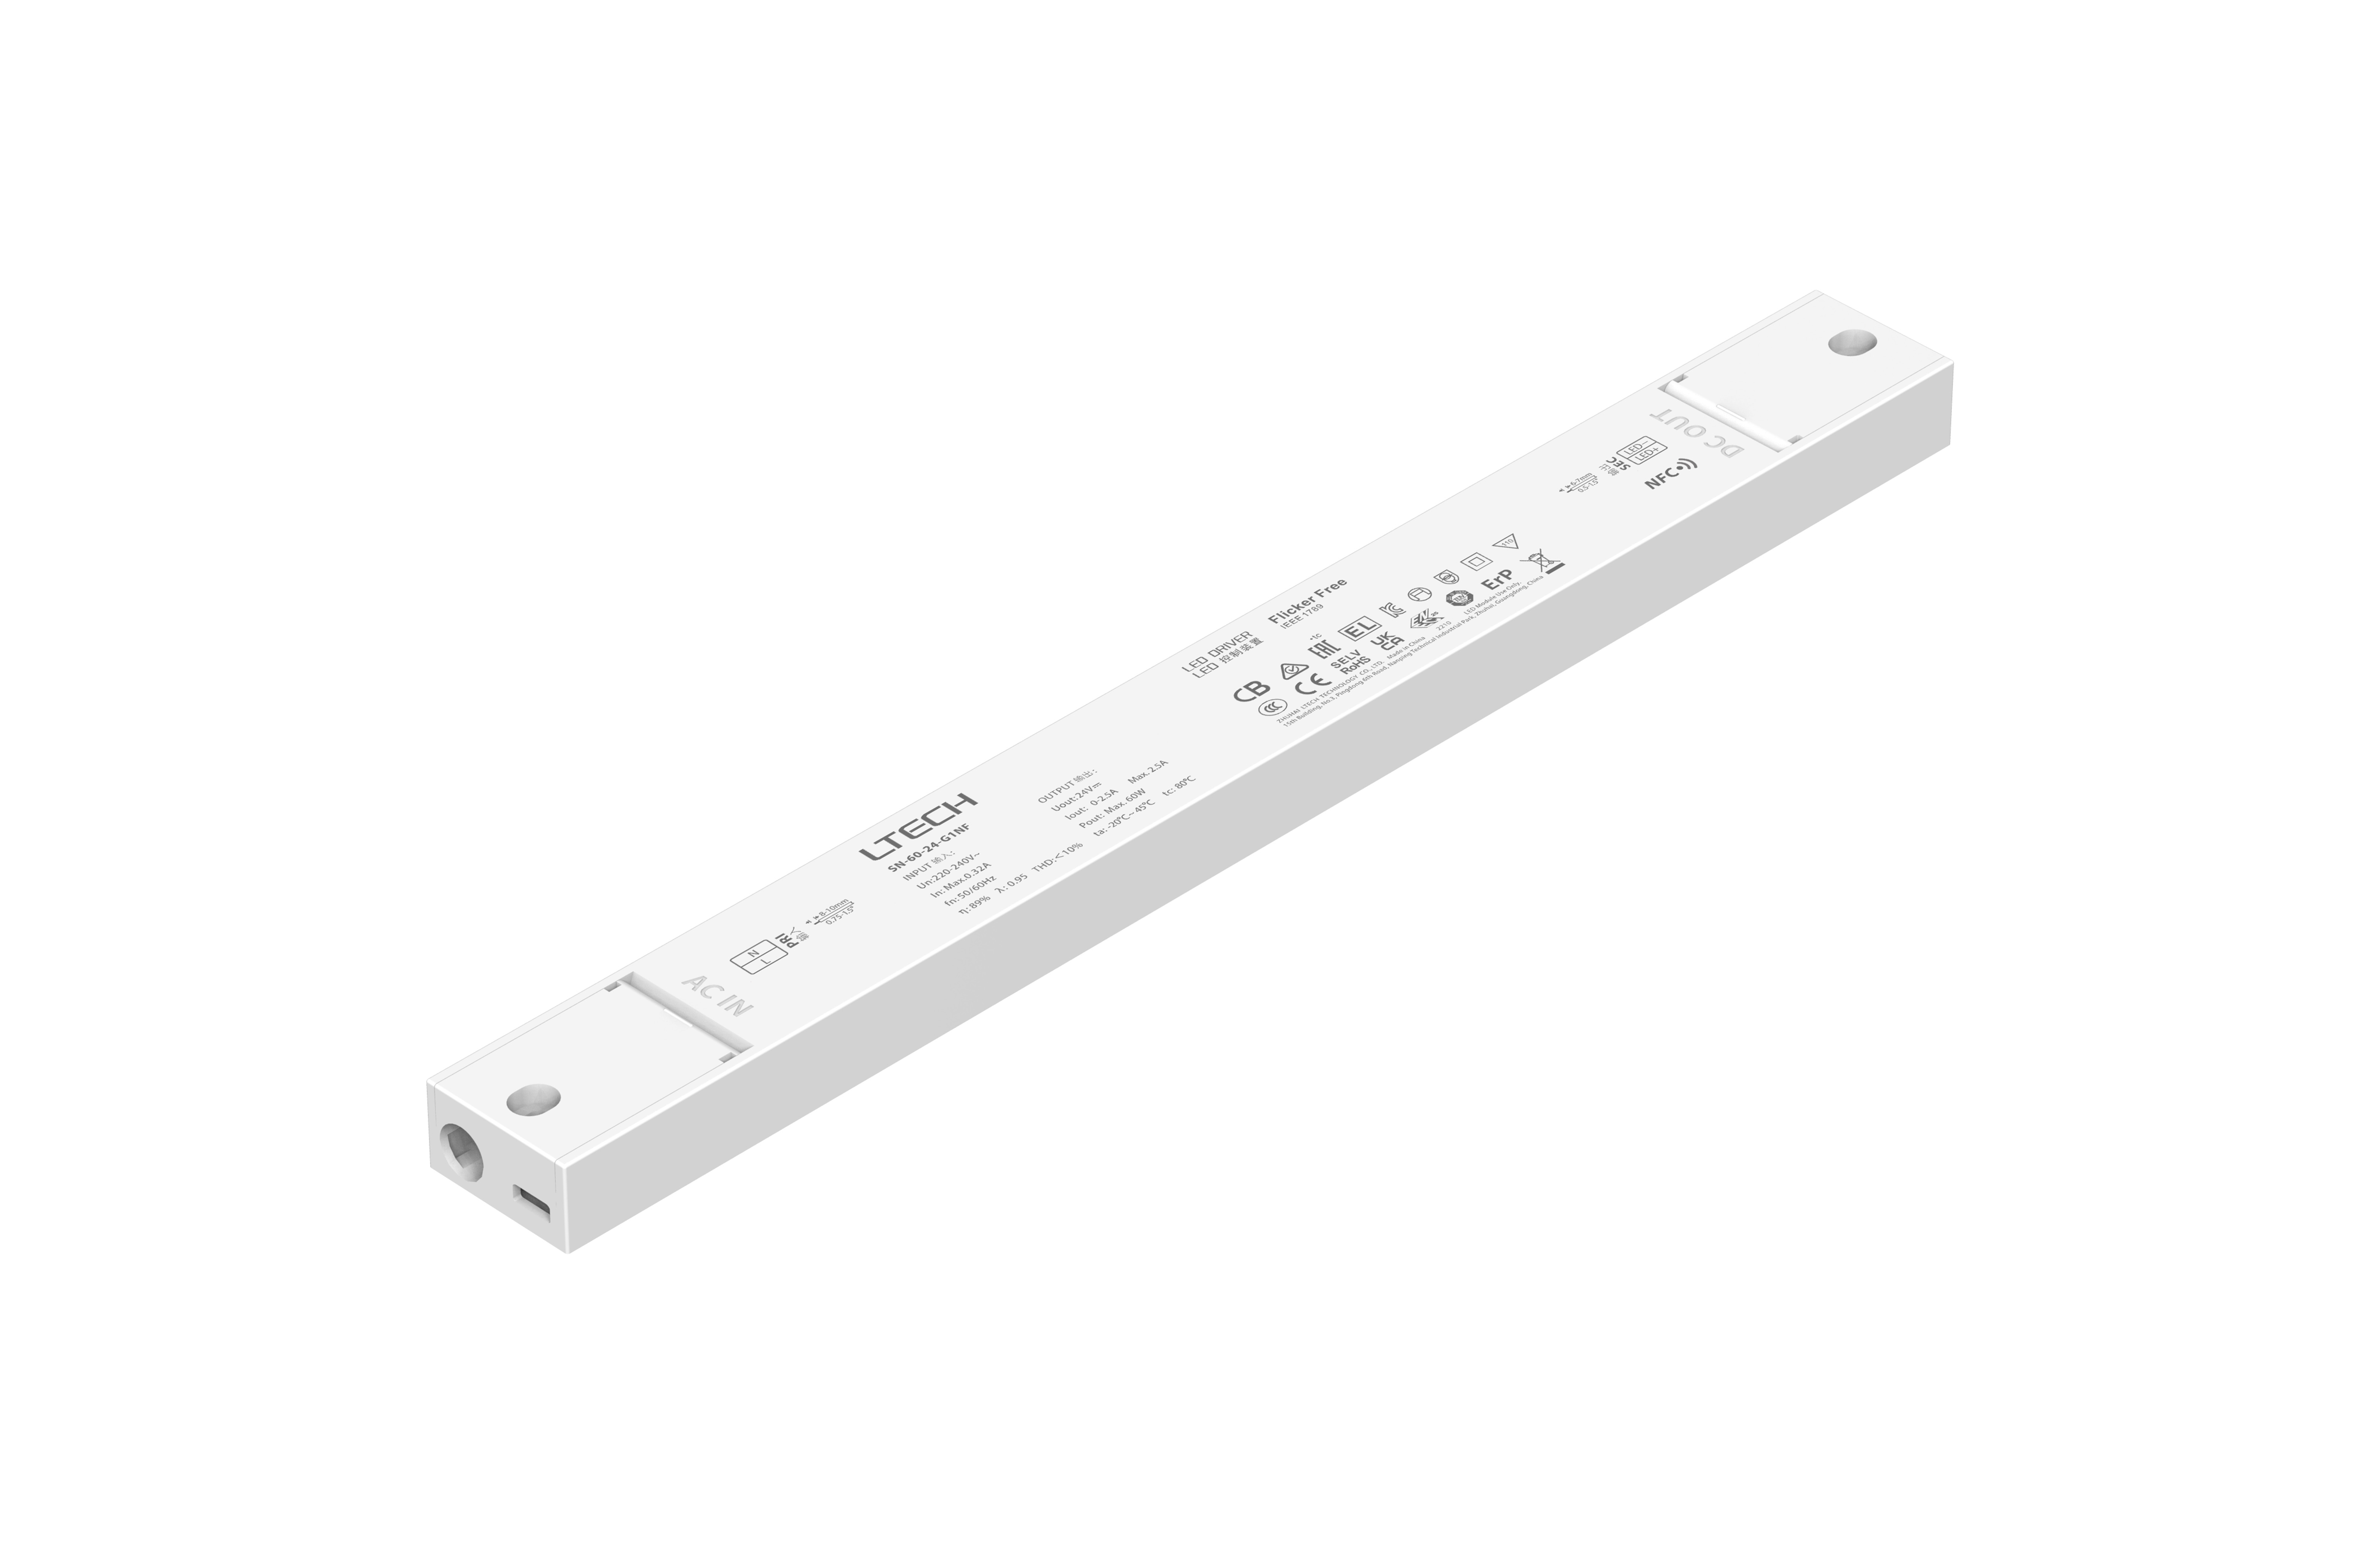 SN-60-24-G1NF-NFC  Intelligent Constant Current NFC ON/OFF LED Driver,  60W, 24VDC 2.5A , 220-240Vac, IP20, 5yrs Warrenty.